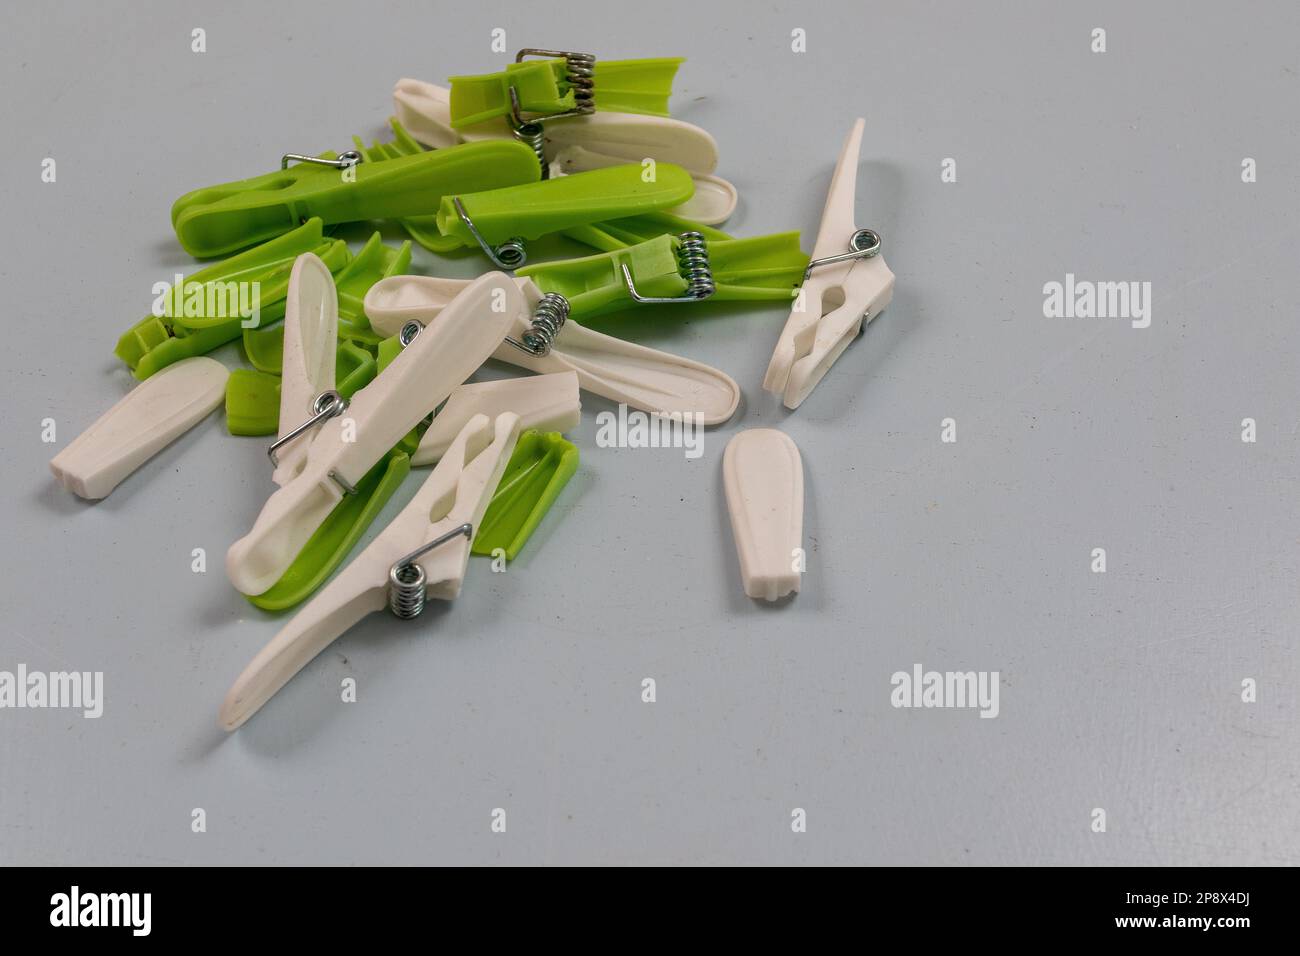 Broken cheap plastic clothes pegs that keep breaking with little use Stock Photo